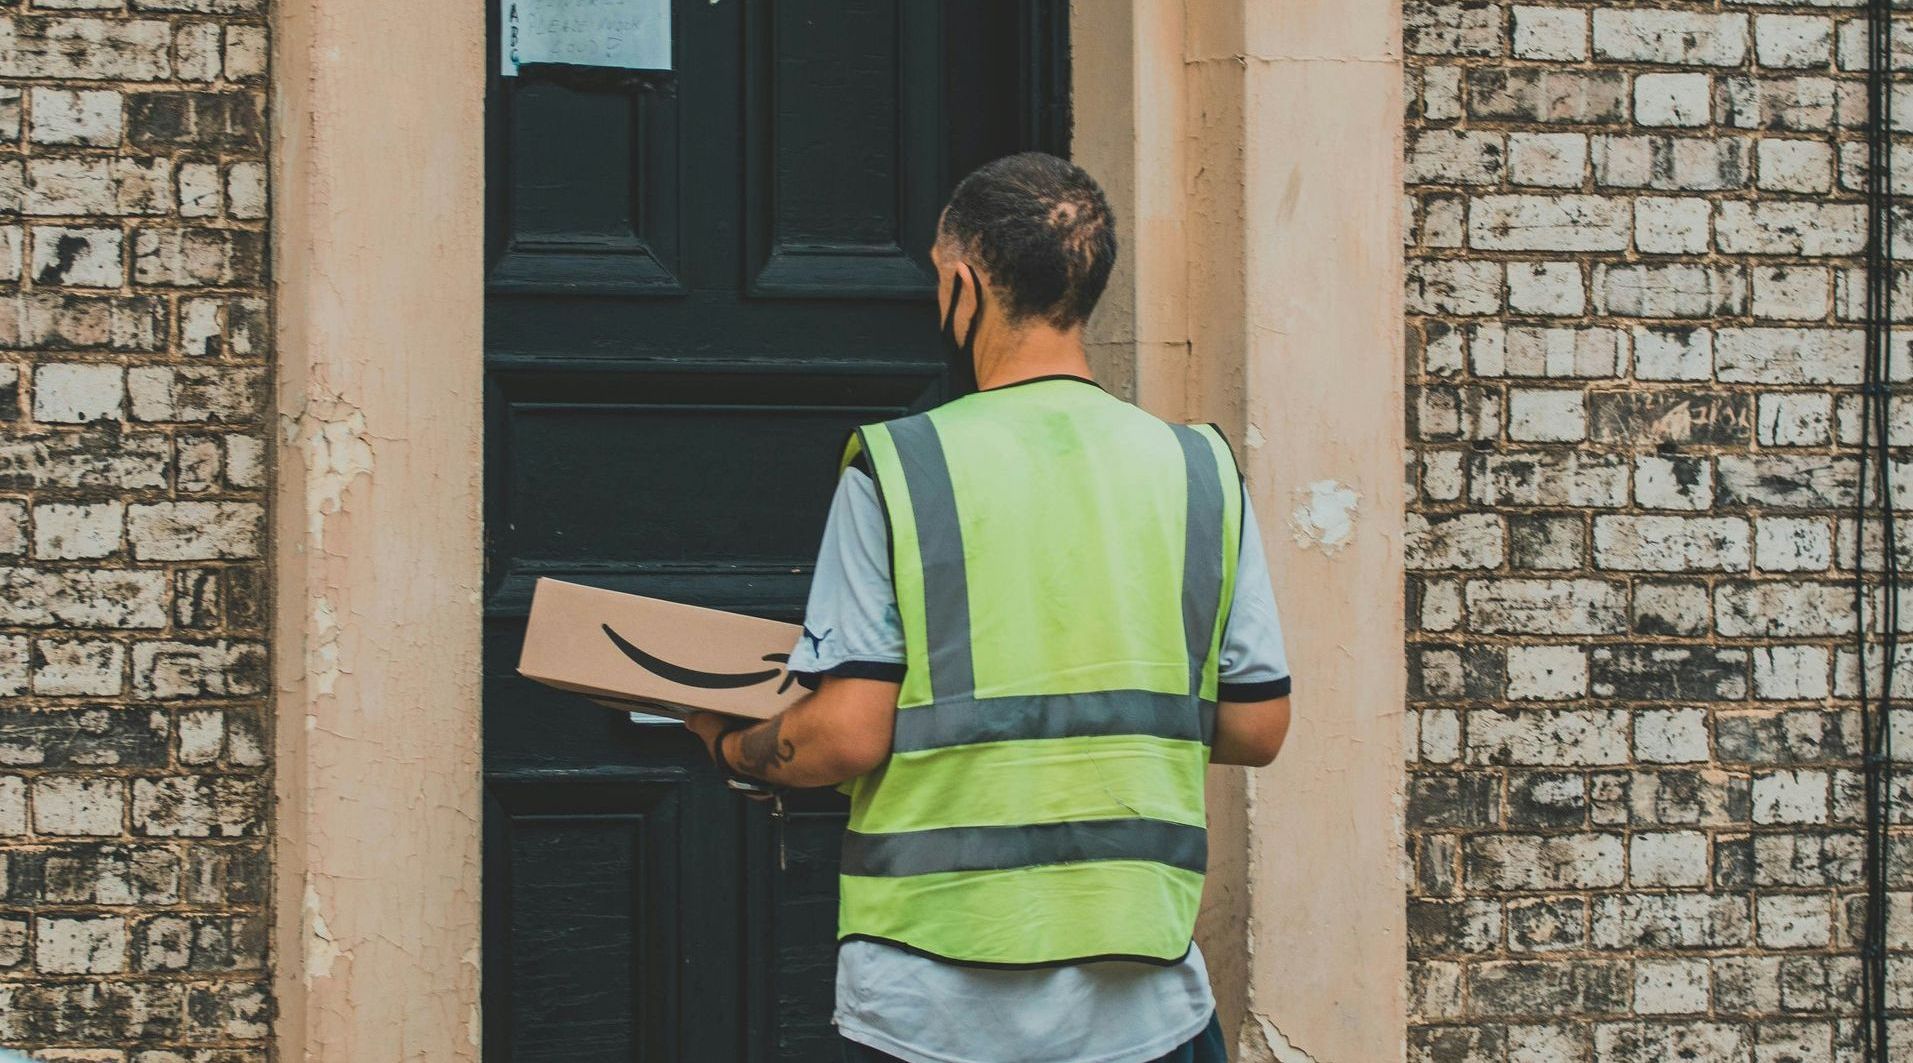 A man in a yellow vest is holding a cardboard box in front of a door.